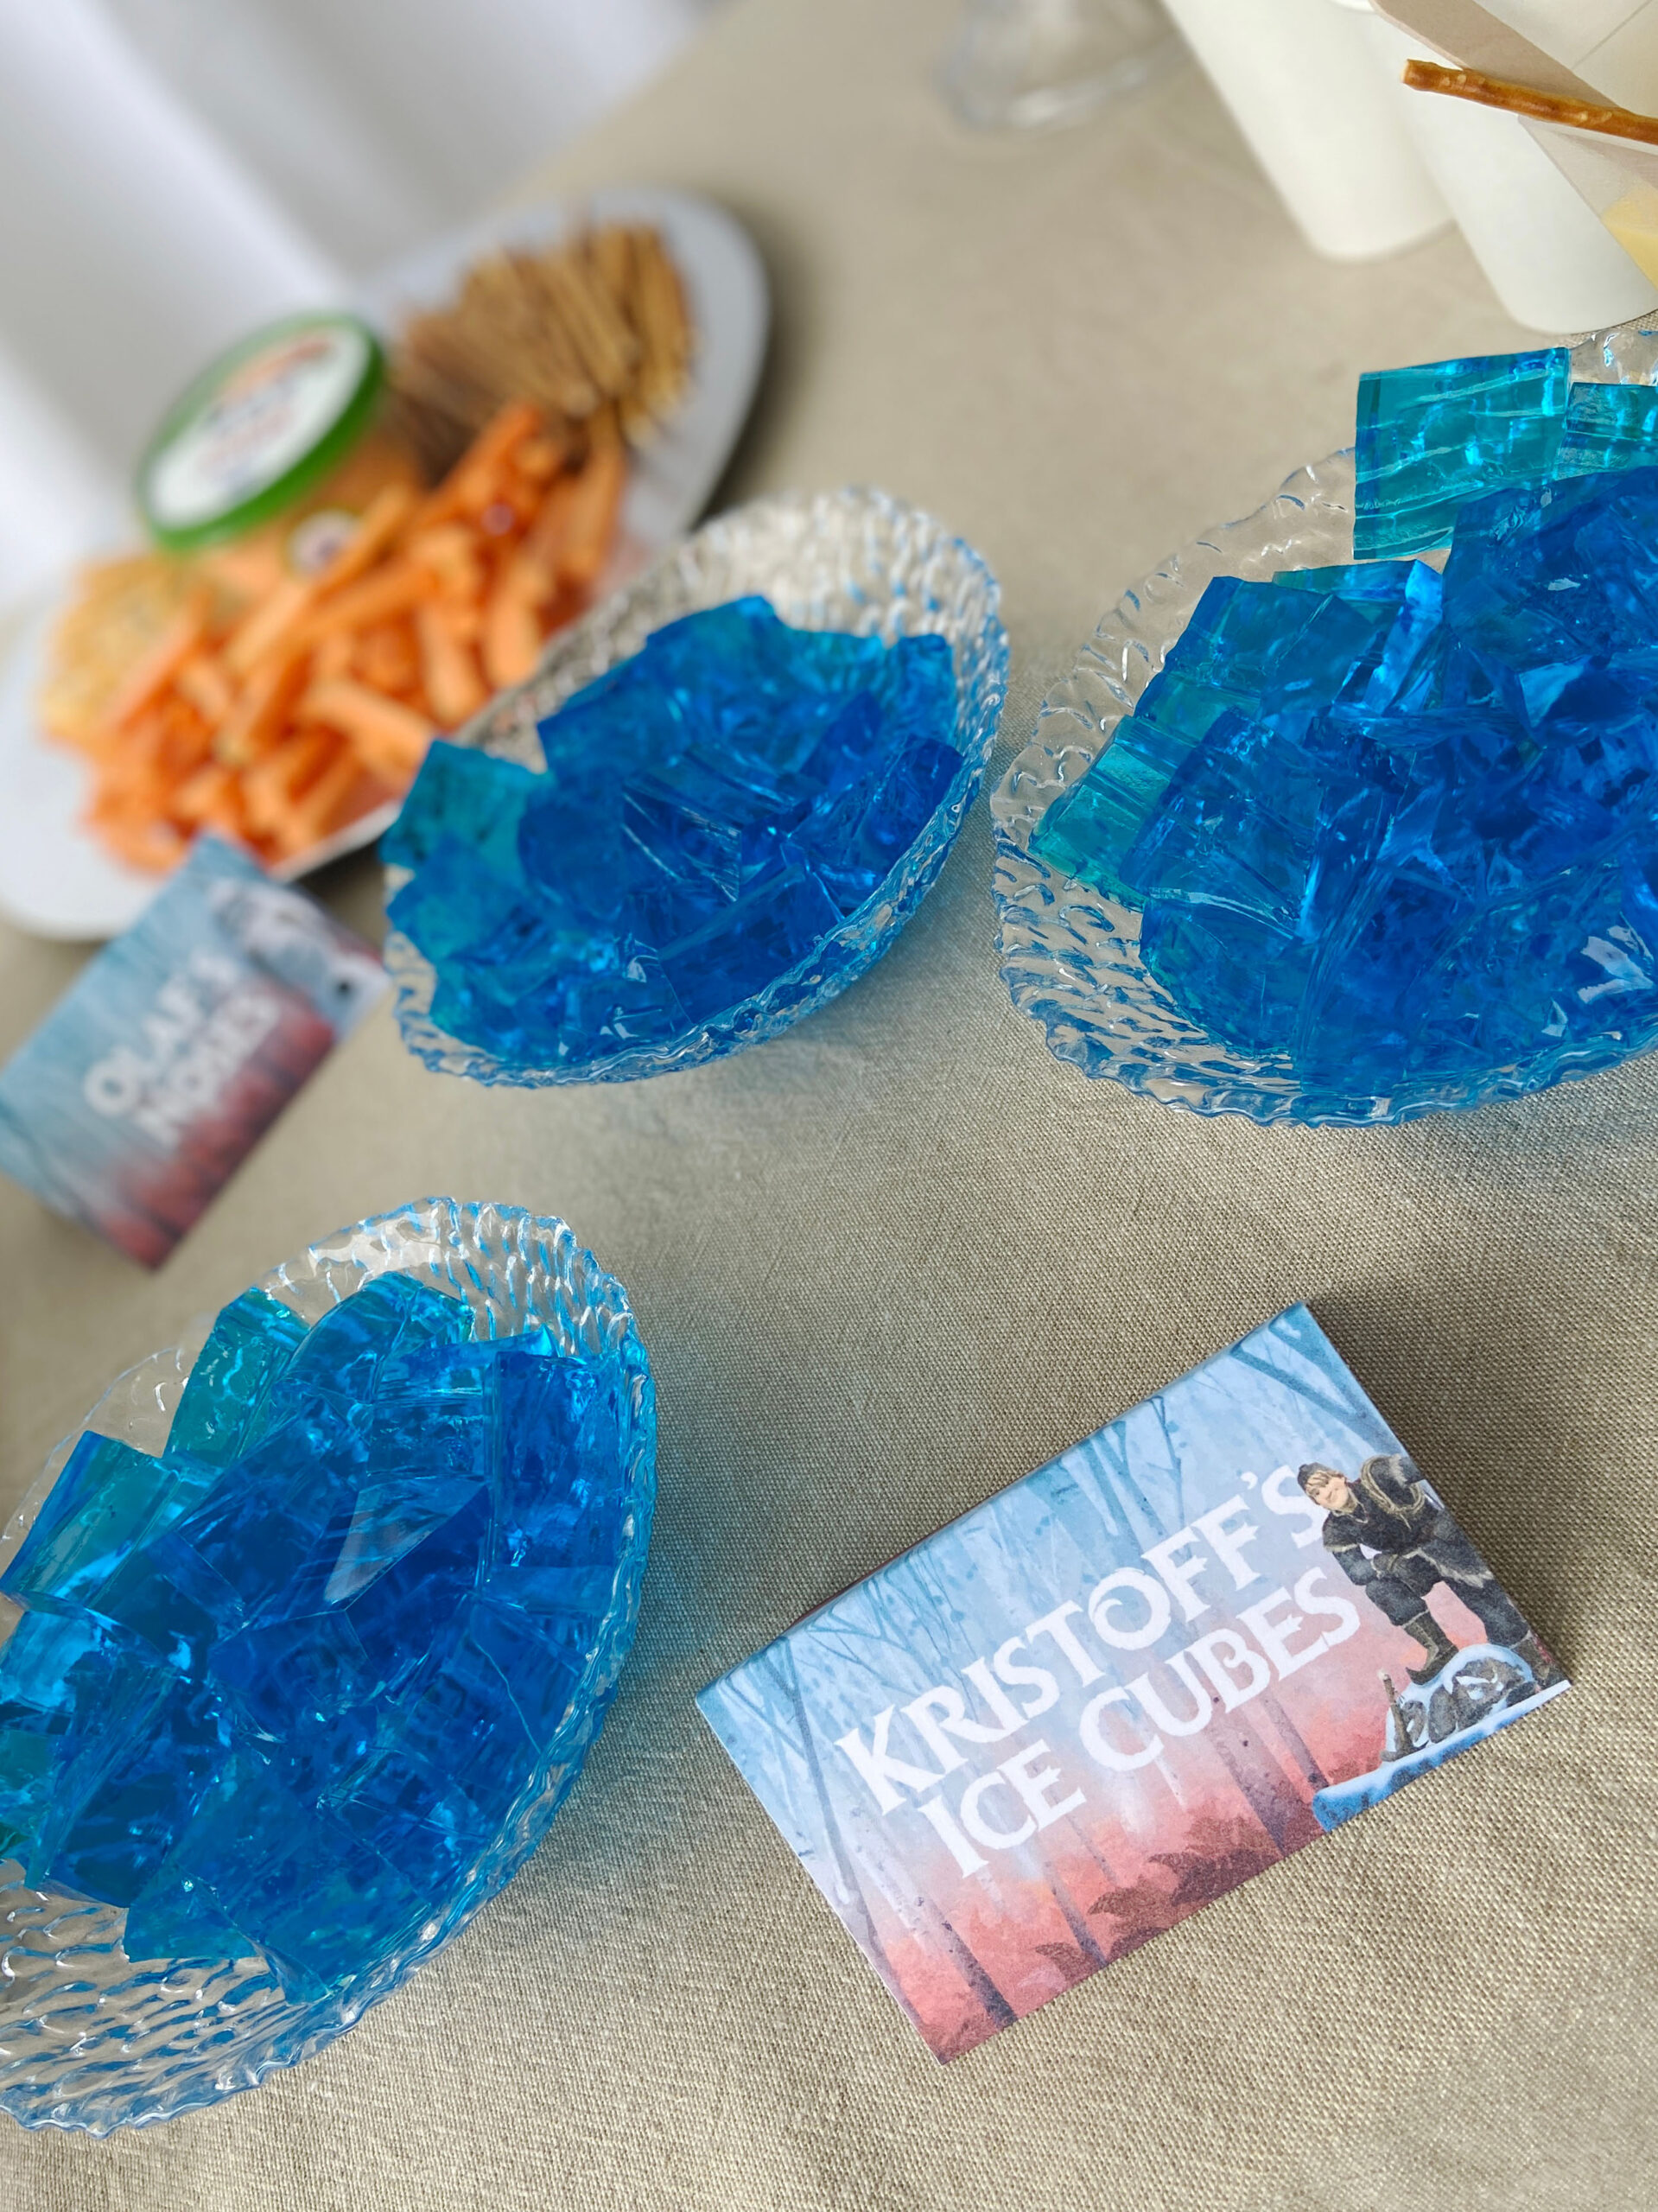 Kristoff's Ice Cubes Frozen Themed Party Food